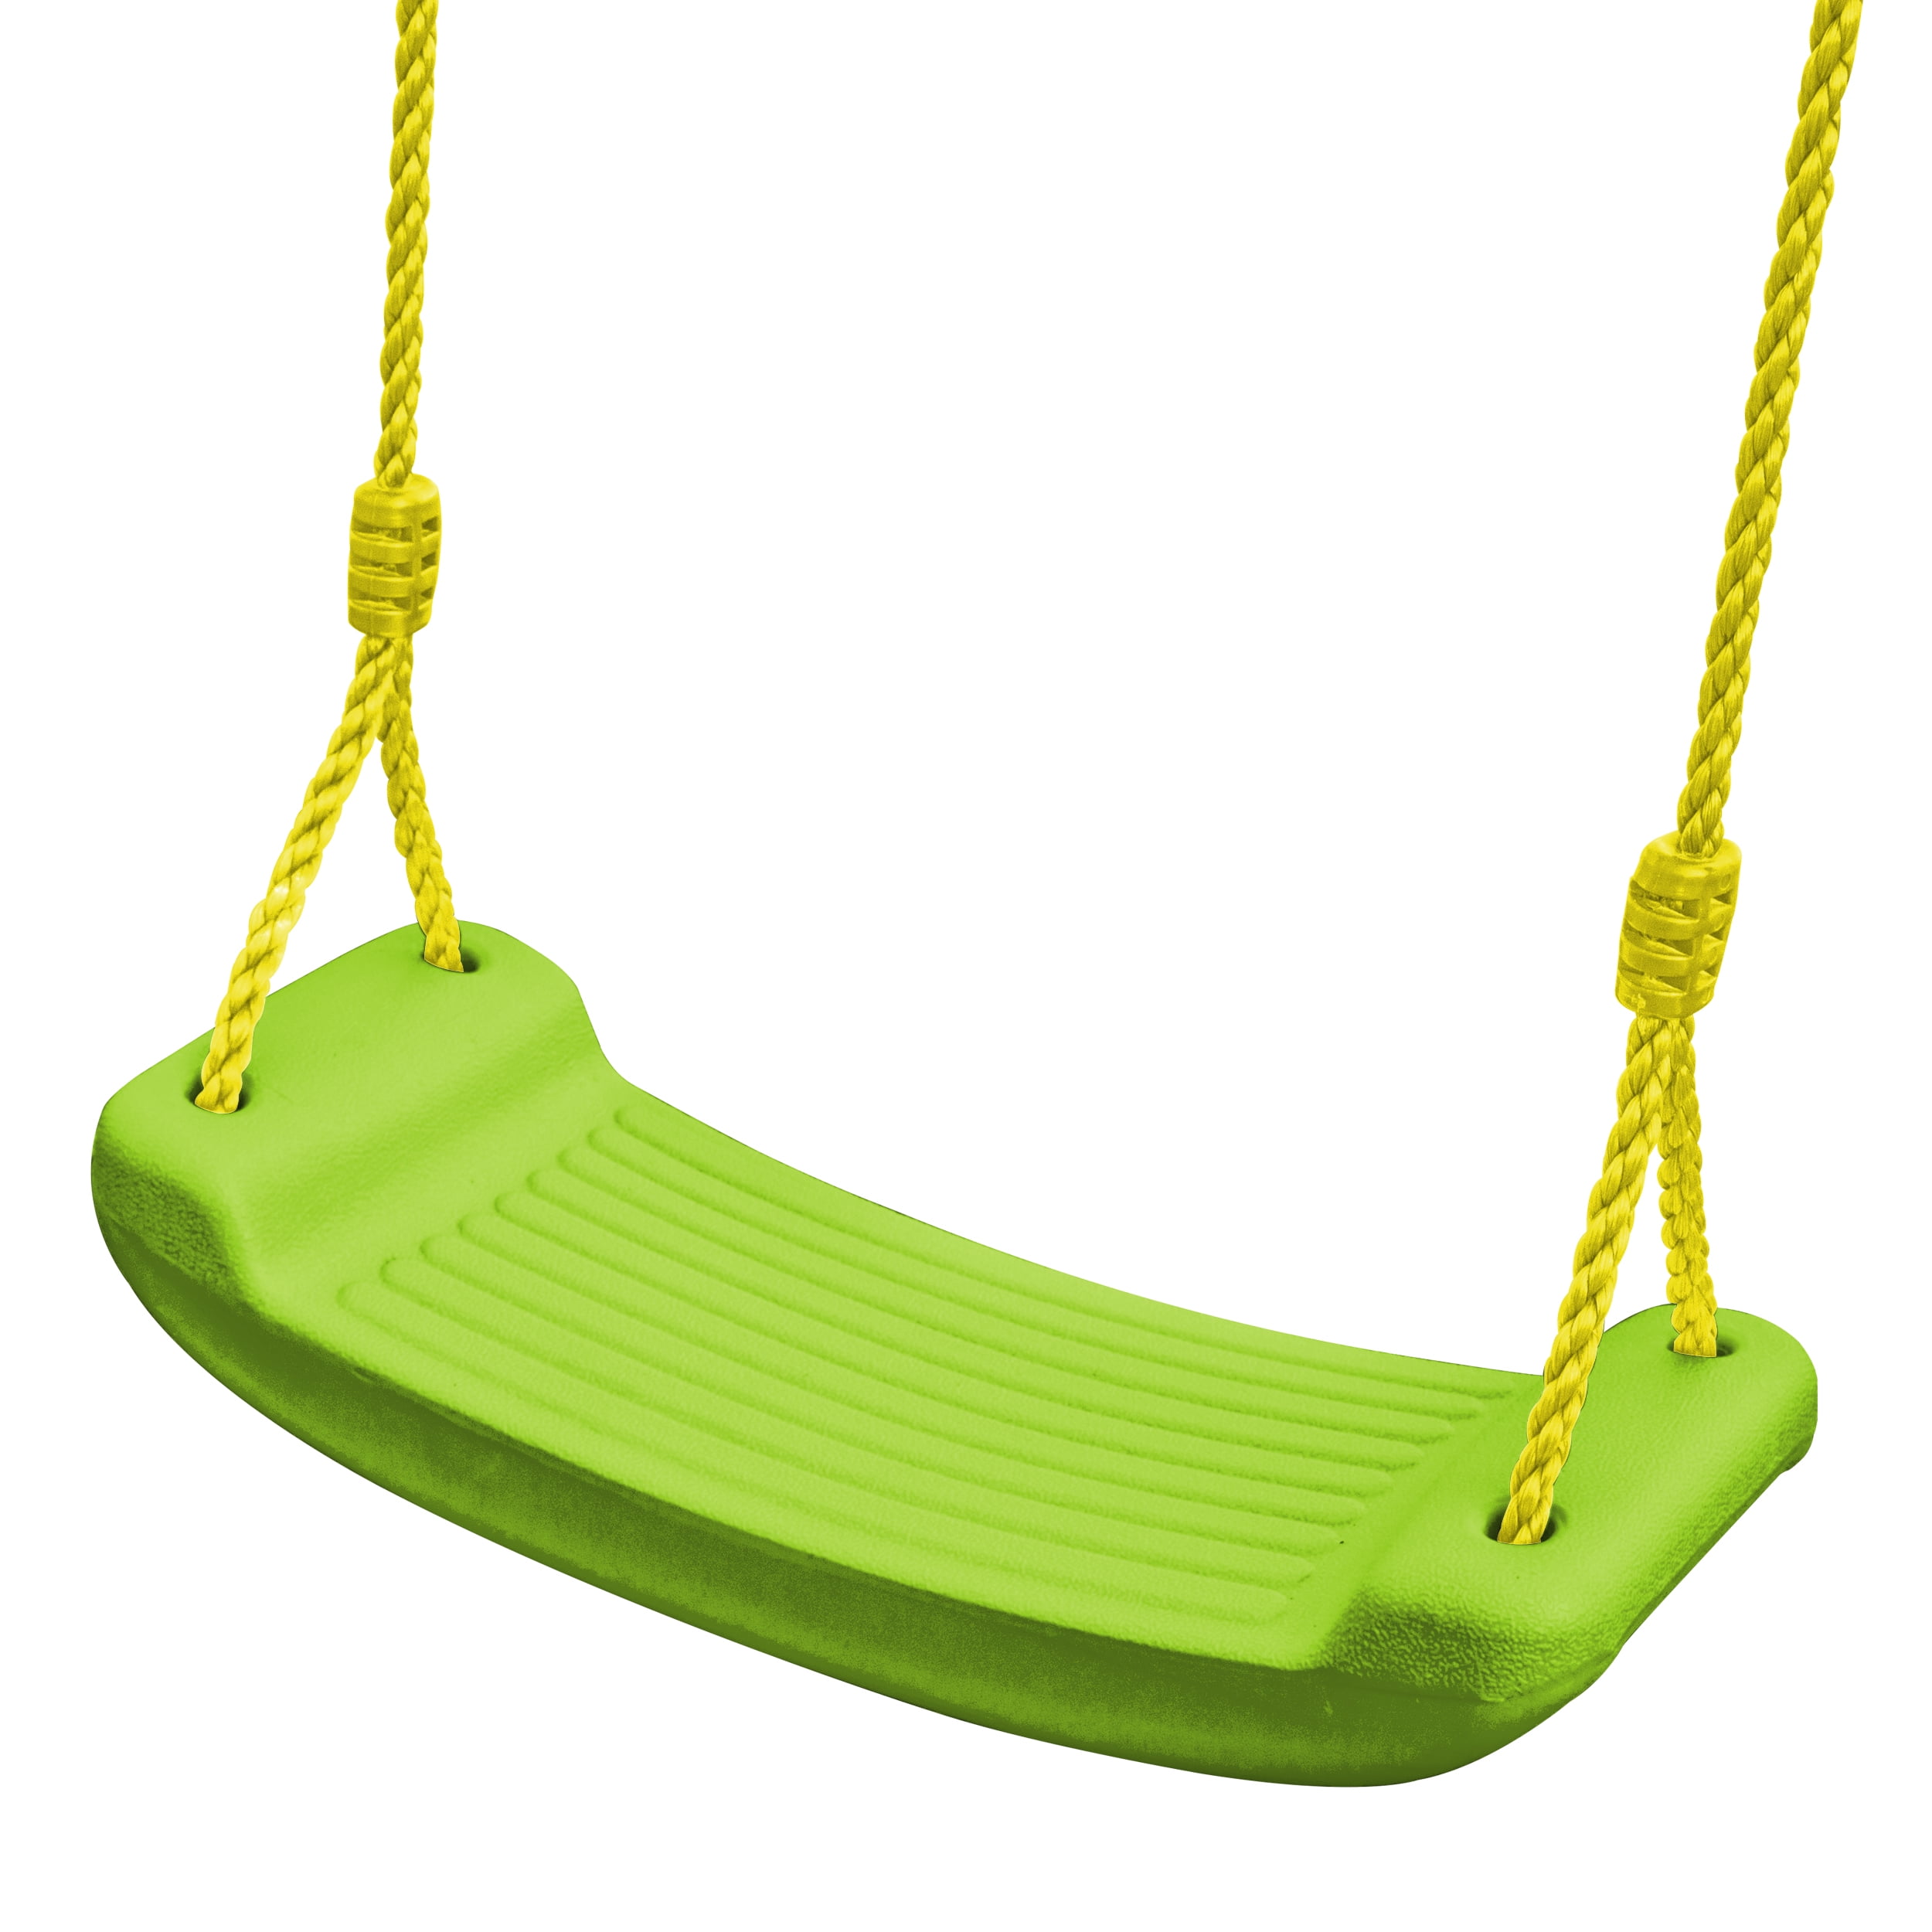 Gorilla Playsets Full Bucket Toddler Swing Green Step2 Turquoise Outdoor Kids for sale online 